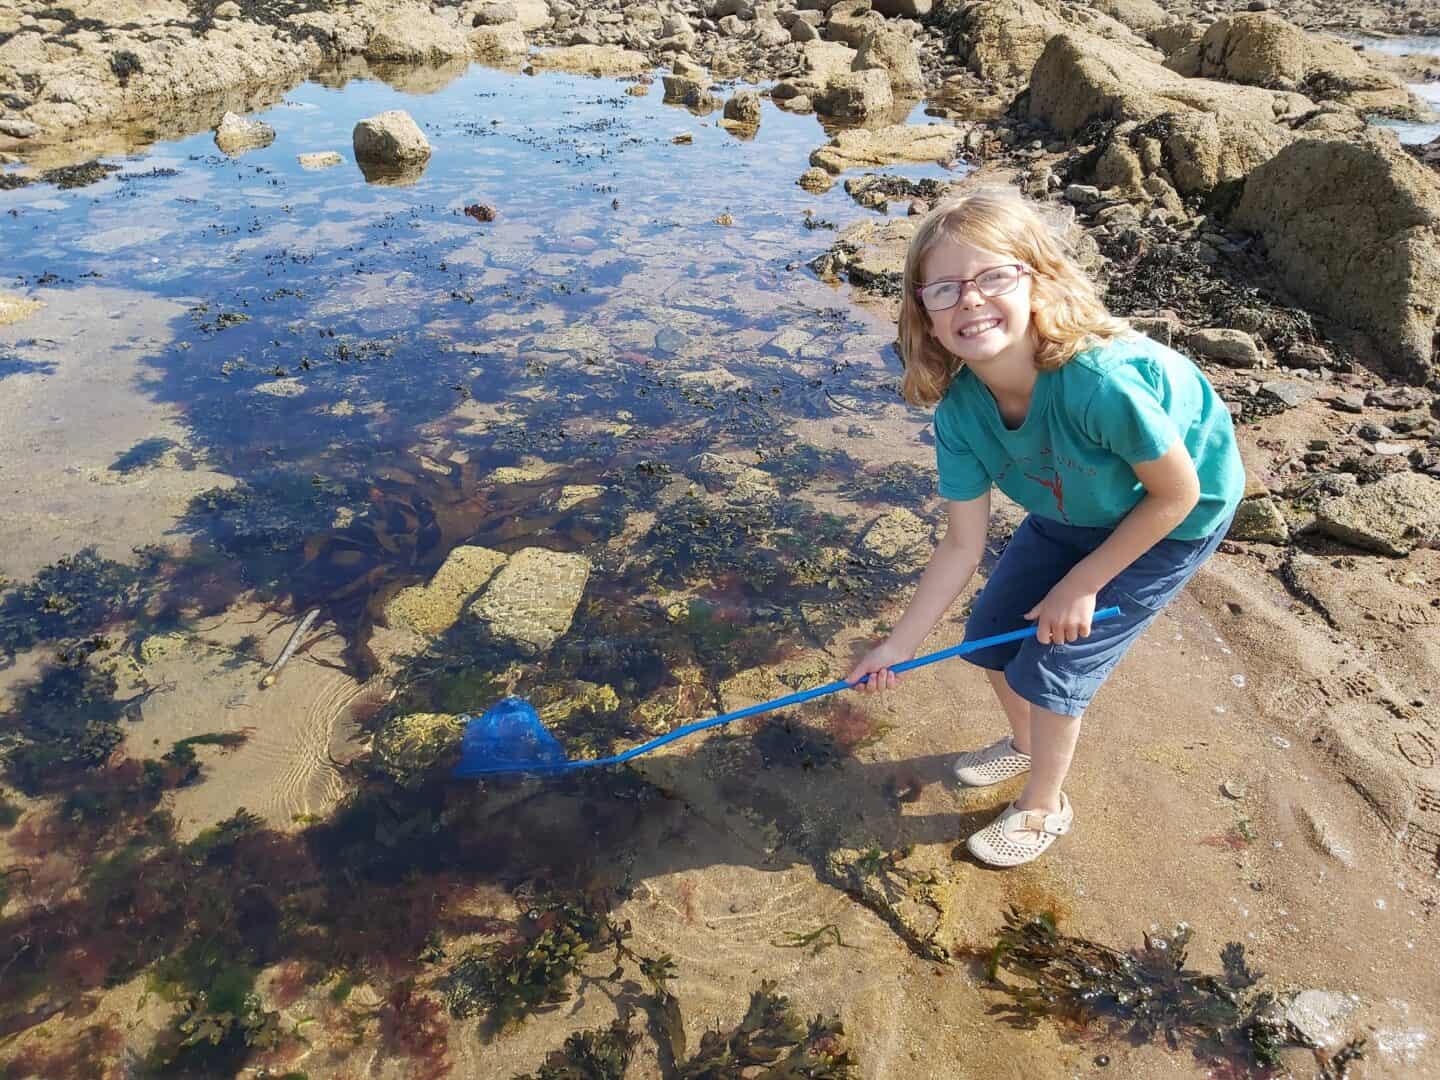 Girl in shorts and a t shirt holding a blue net and rock pooling in a pool at Belhaven Bay beach.  